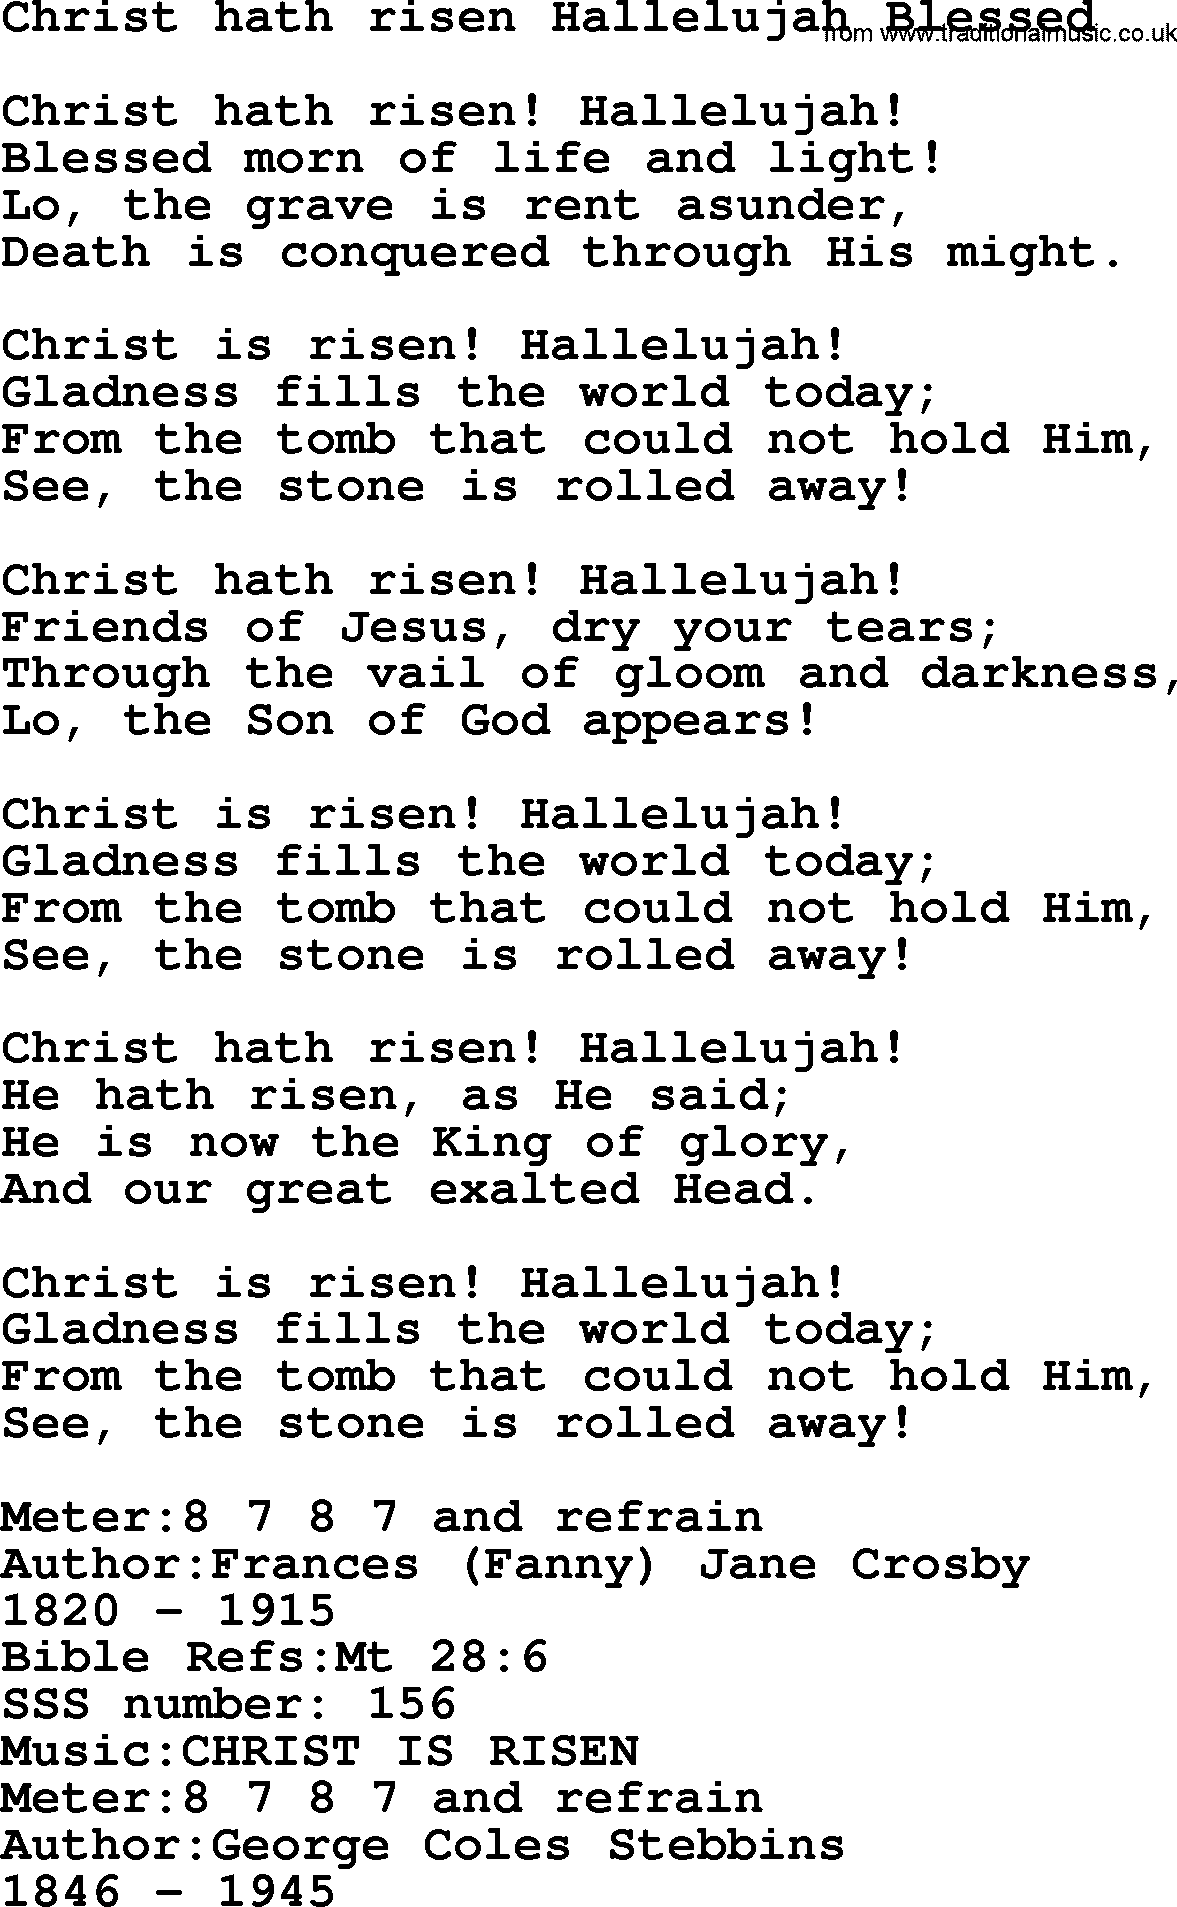 Sacred Songs and Solos complete, 1200 Hymns, title: Christ Hath Risen Hallelujah Blessed, lyrics and PDF